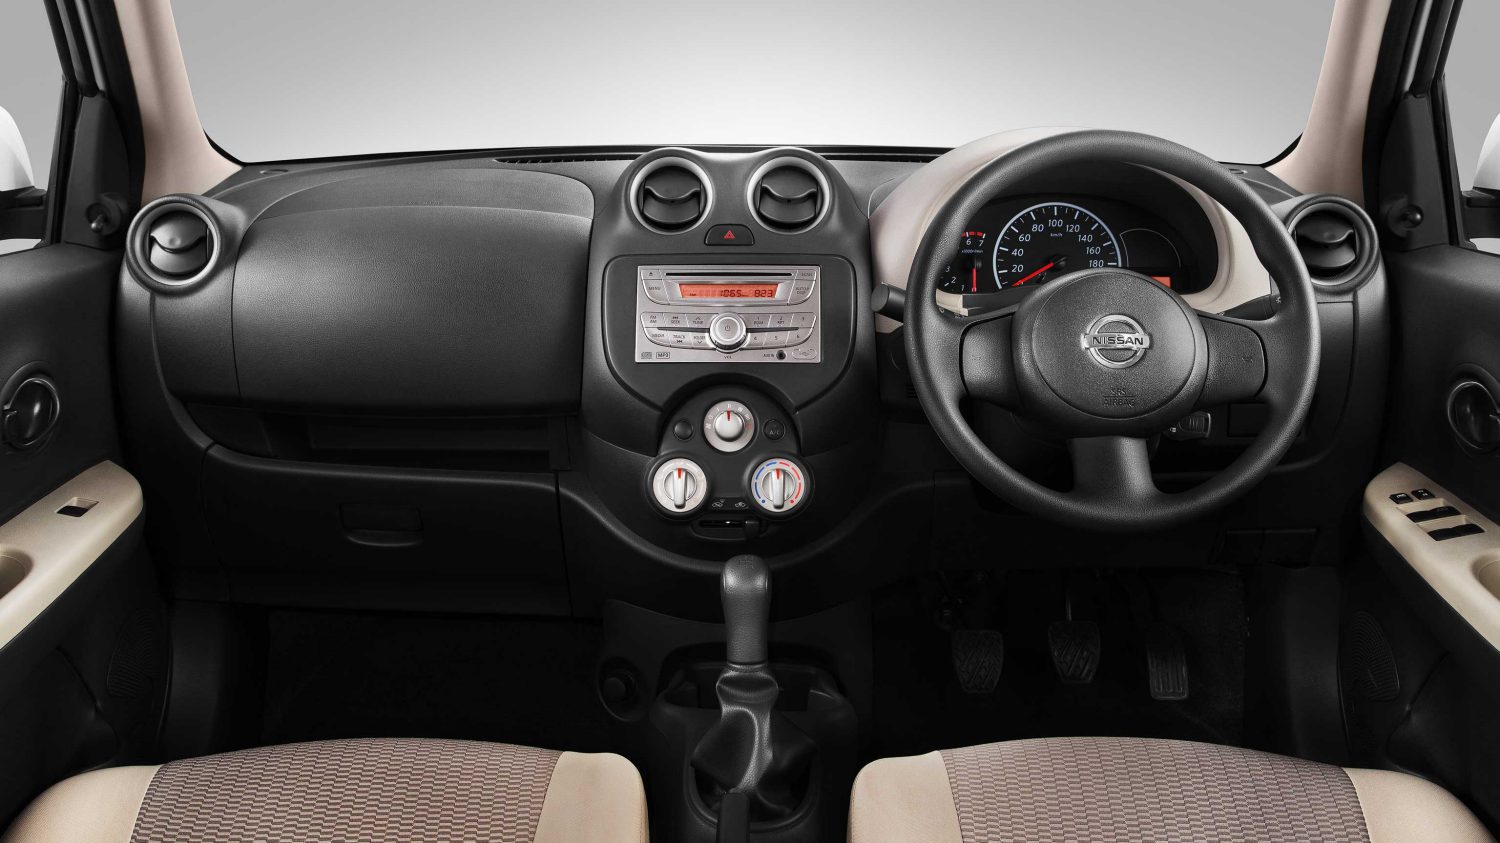 Nissan Micra XL ICC WT20 Special Edition interior front view